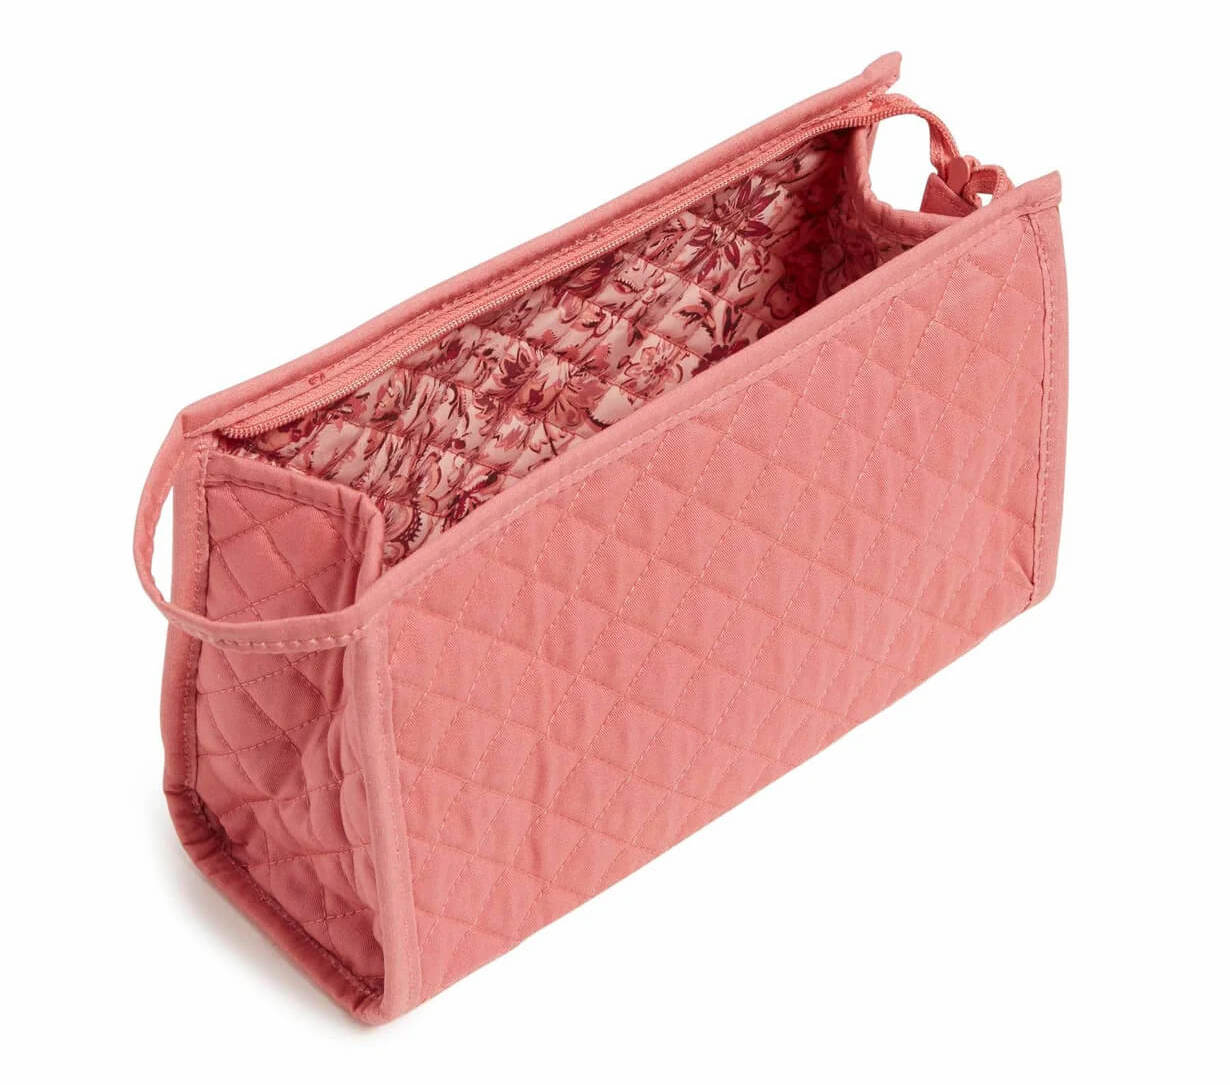 pink quilted cosmetic bag open showing pattern inside